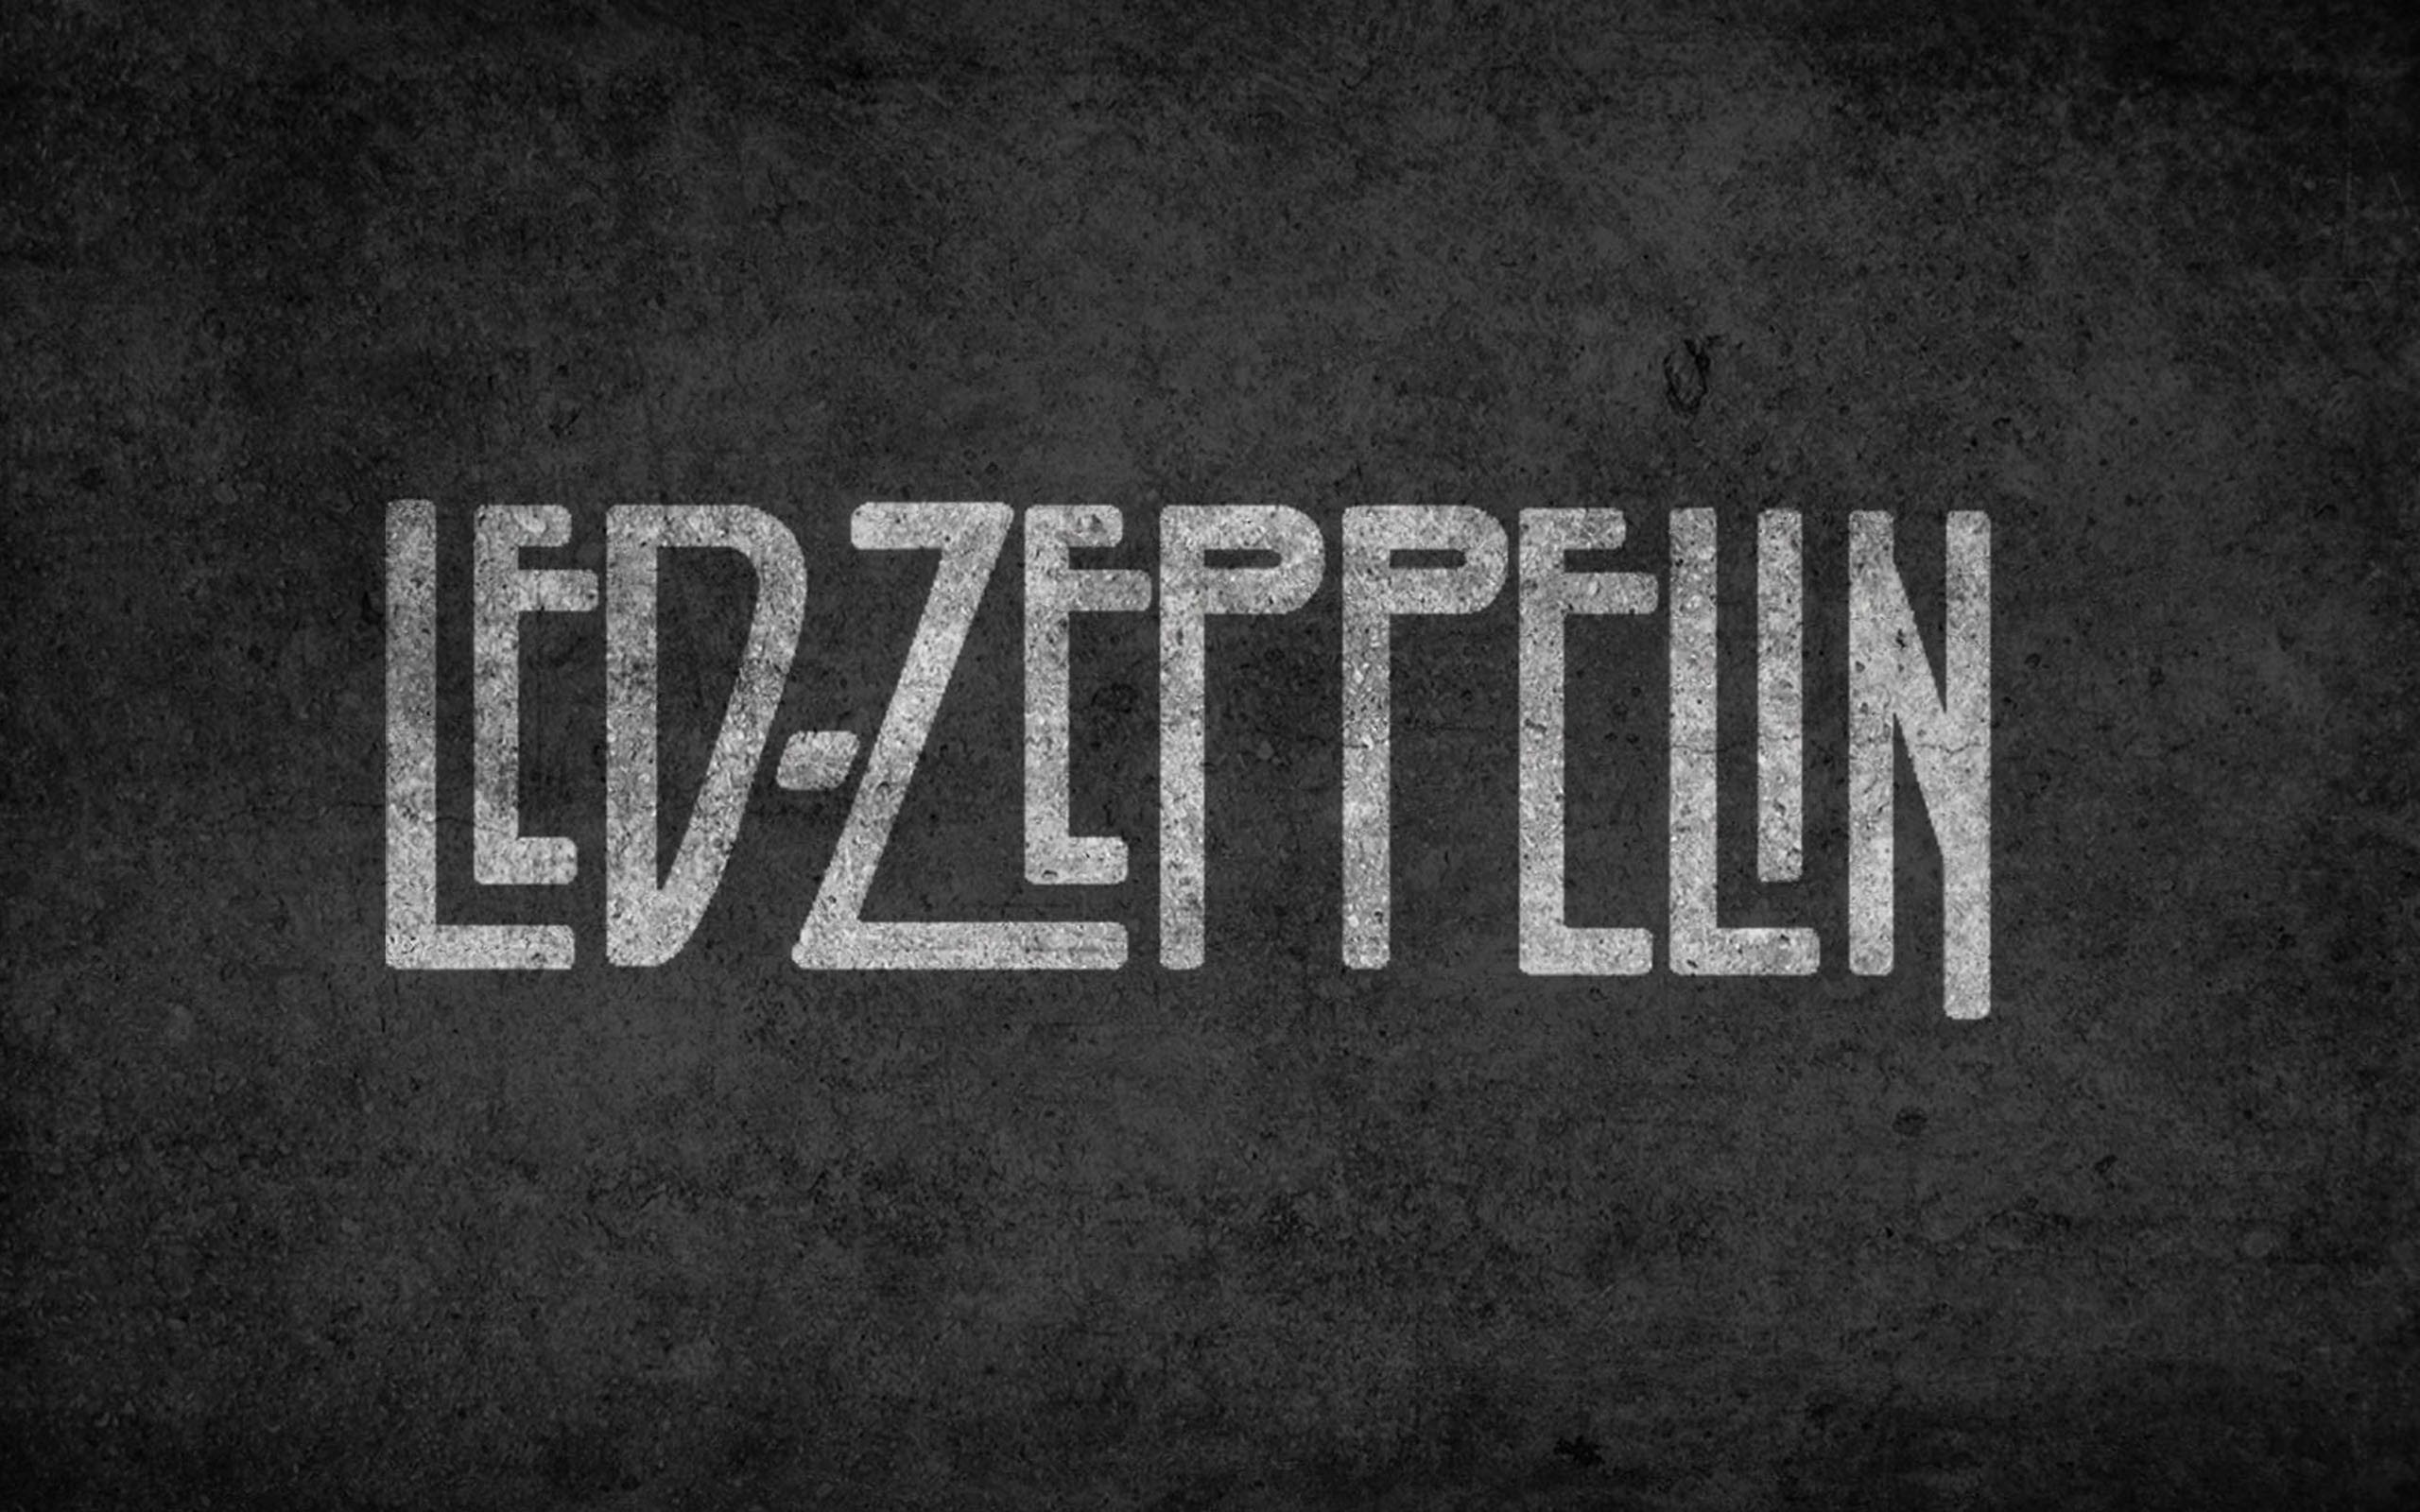 Download wallpaper Led Zeppelin, british rock band, logo, grunge for desktop with resolution 2560x1600. High Quality HD picture wallpaper